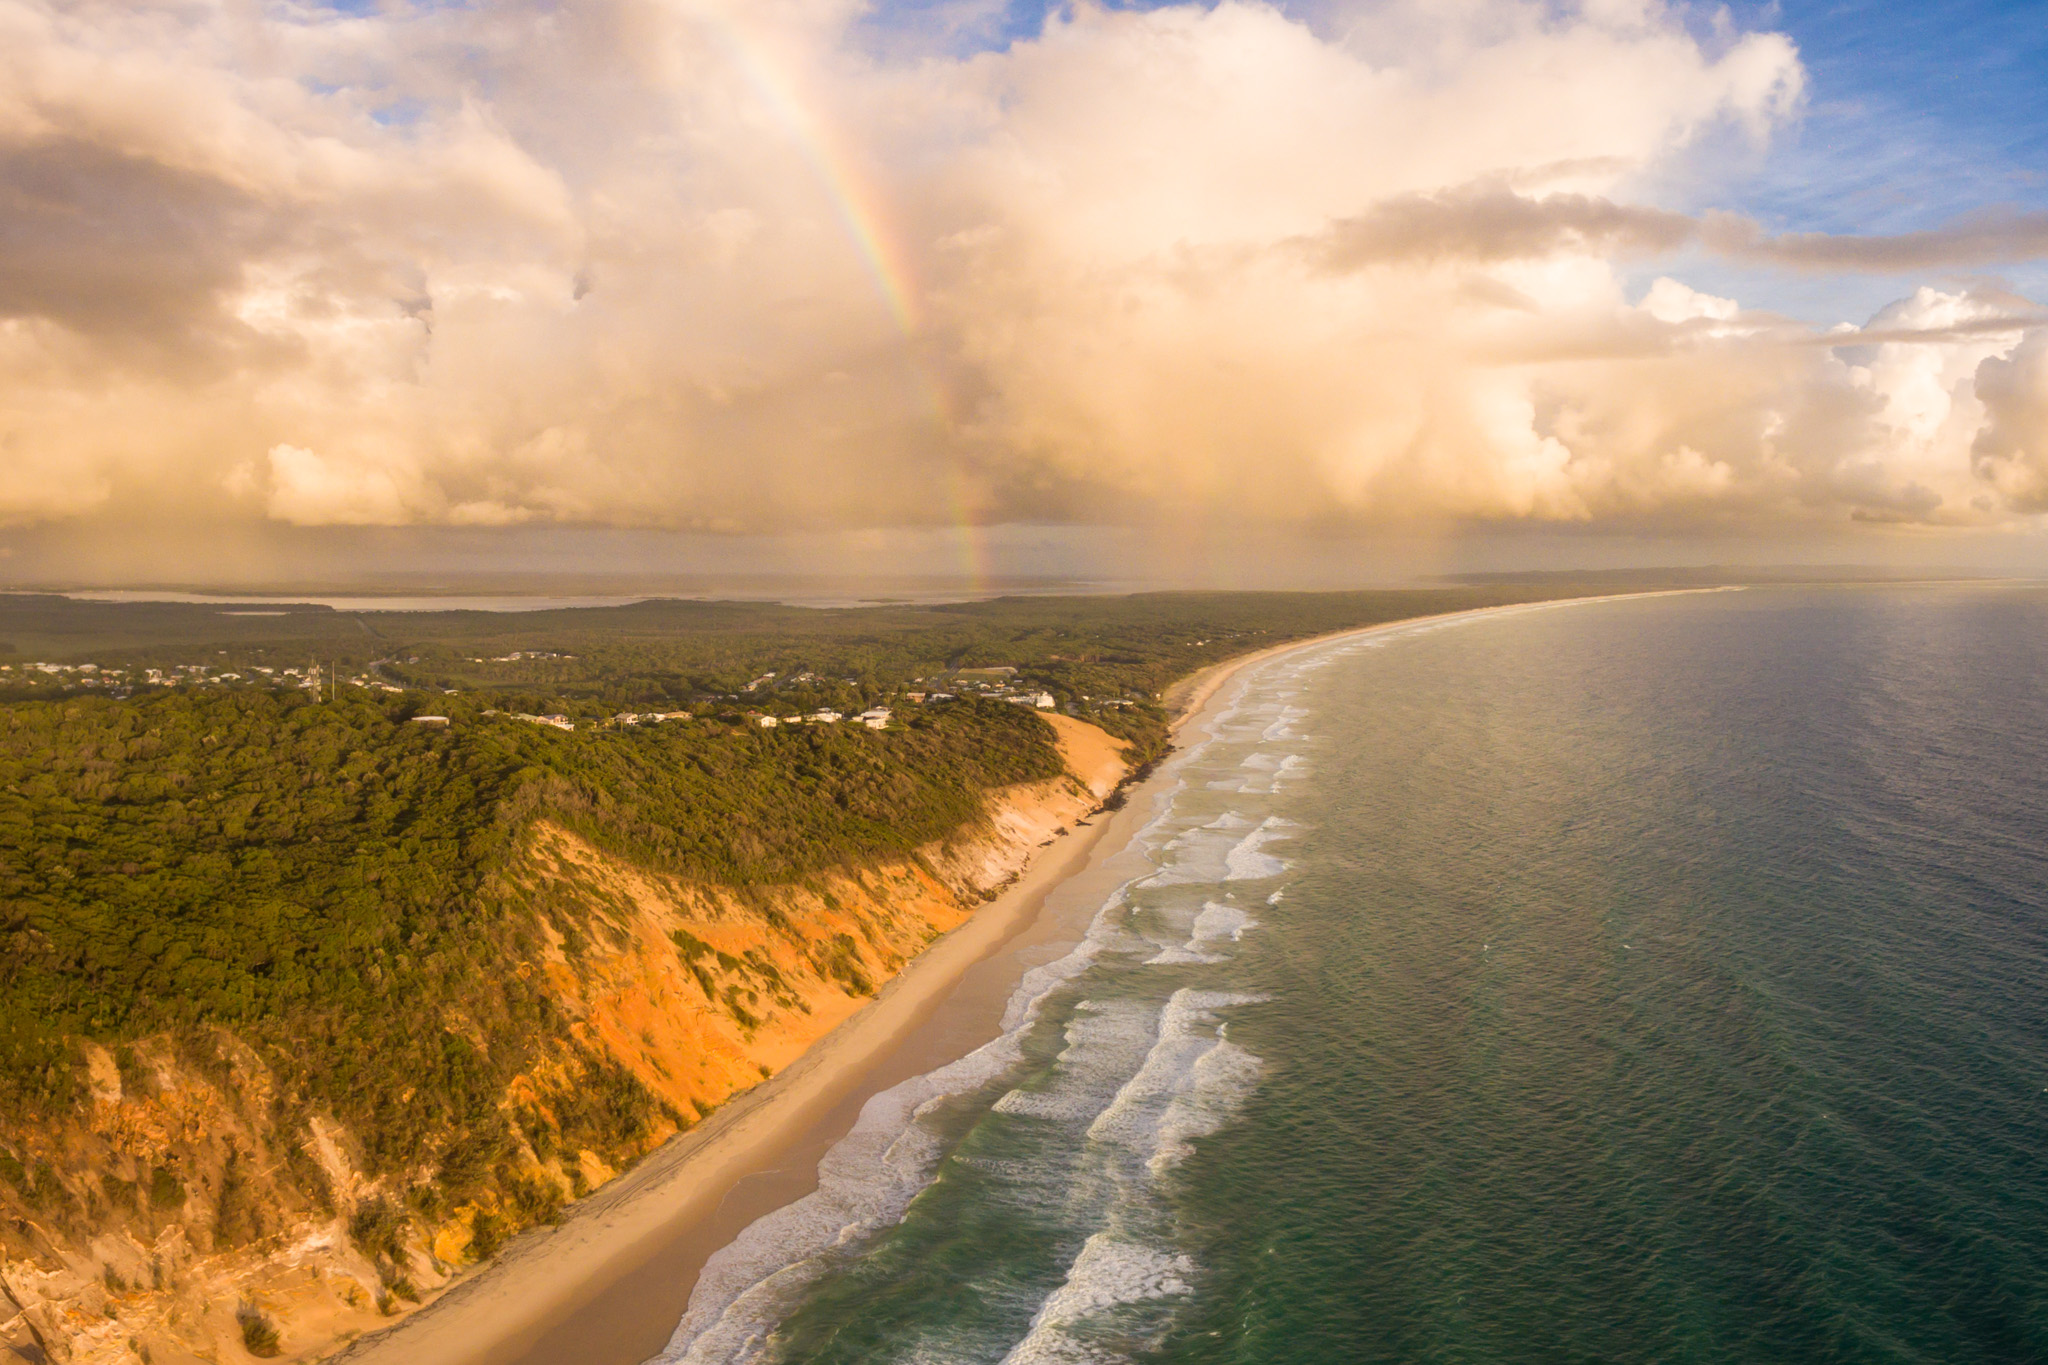 Tranquil Film Shows the Tropical and Rainbow Filled Sunshine Coast of Australia